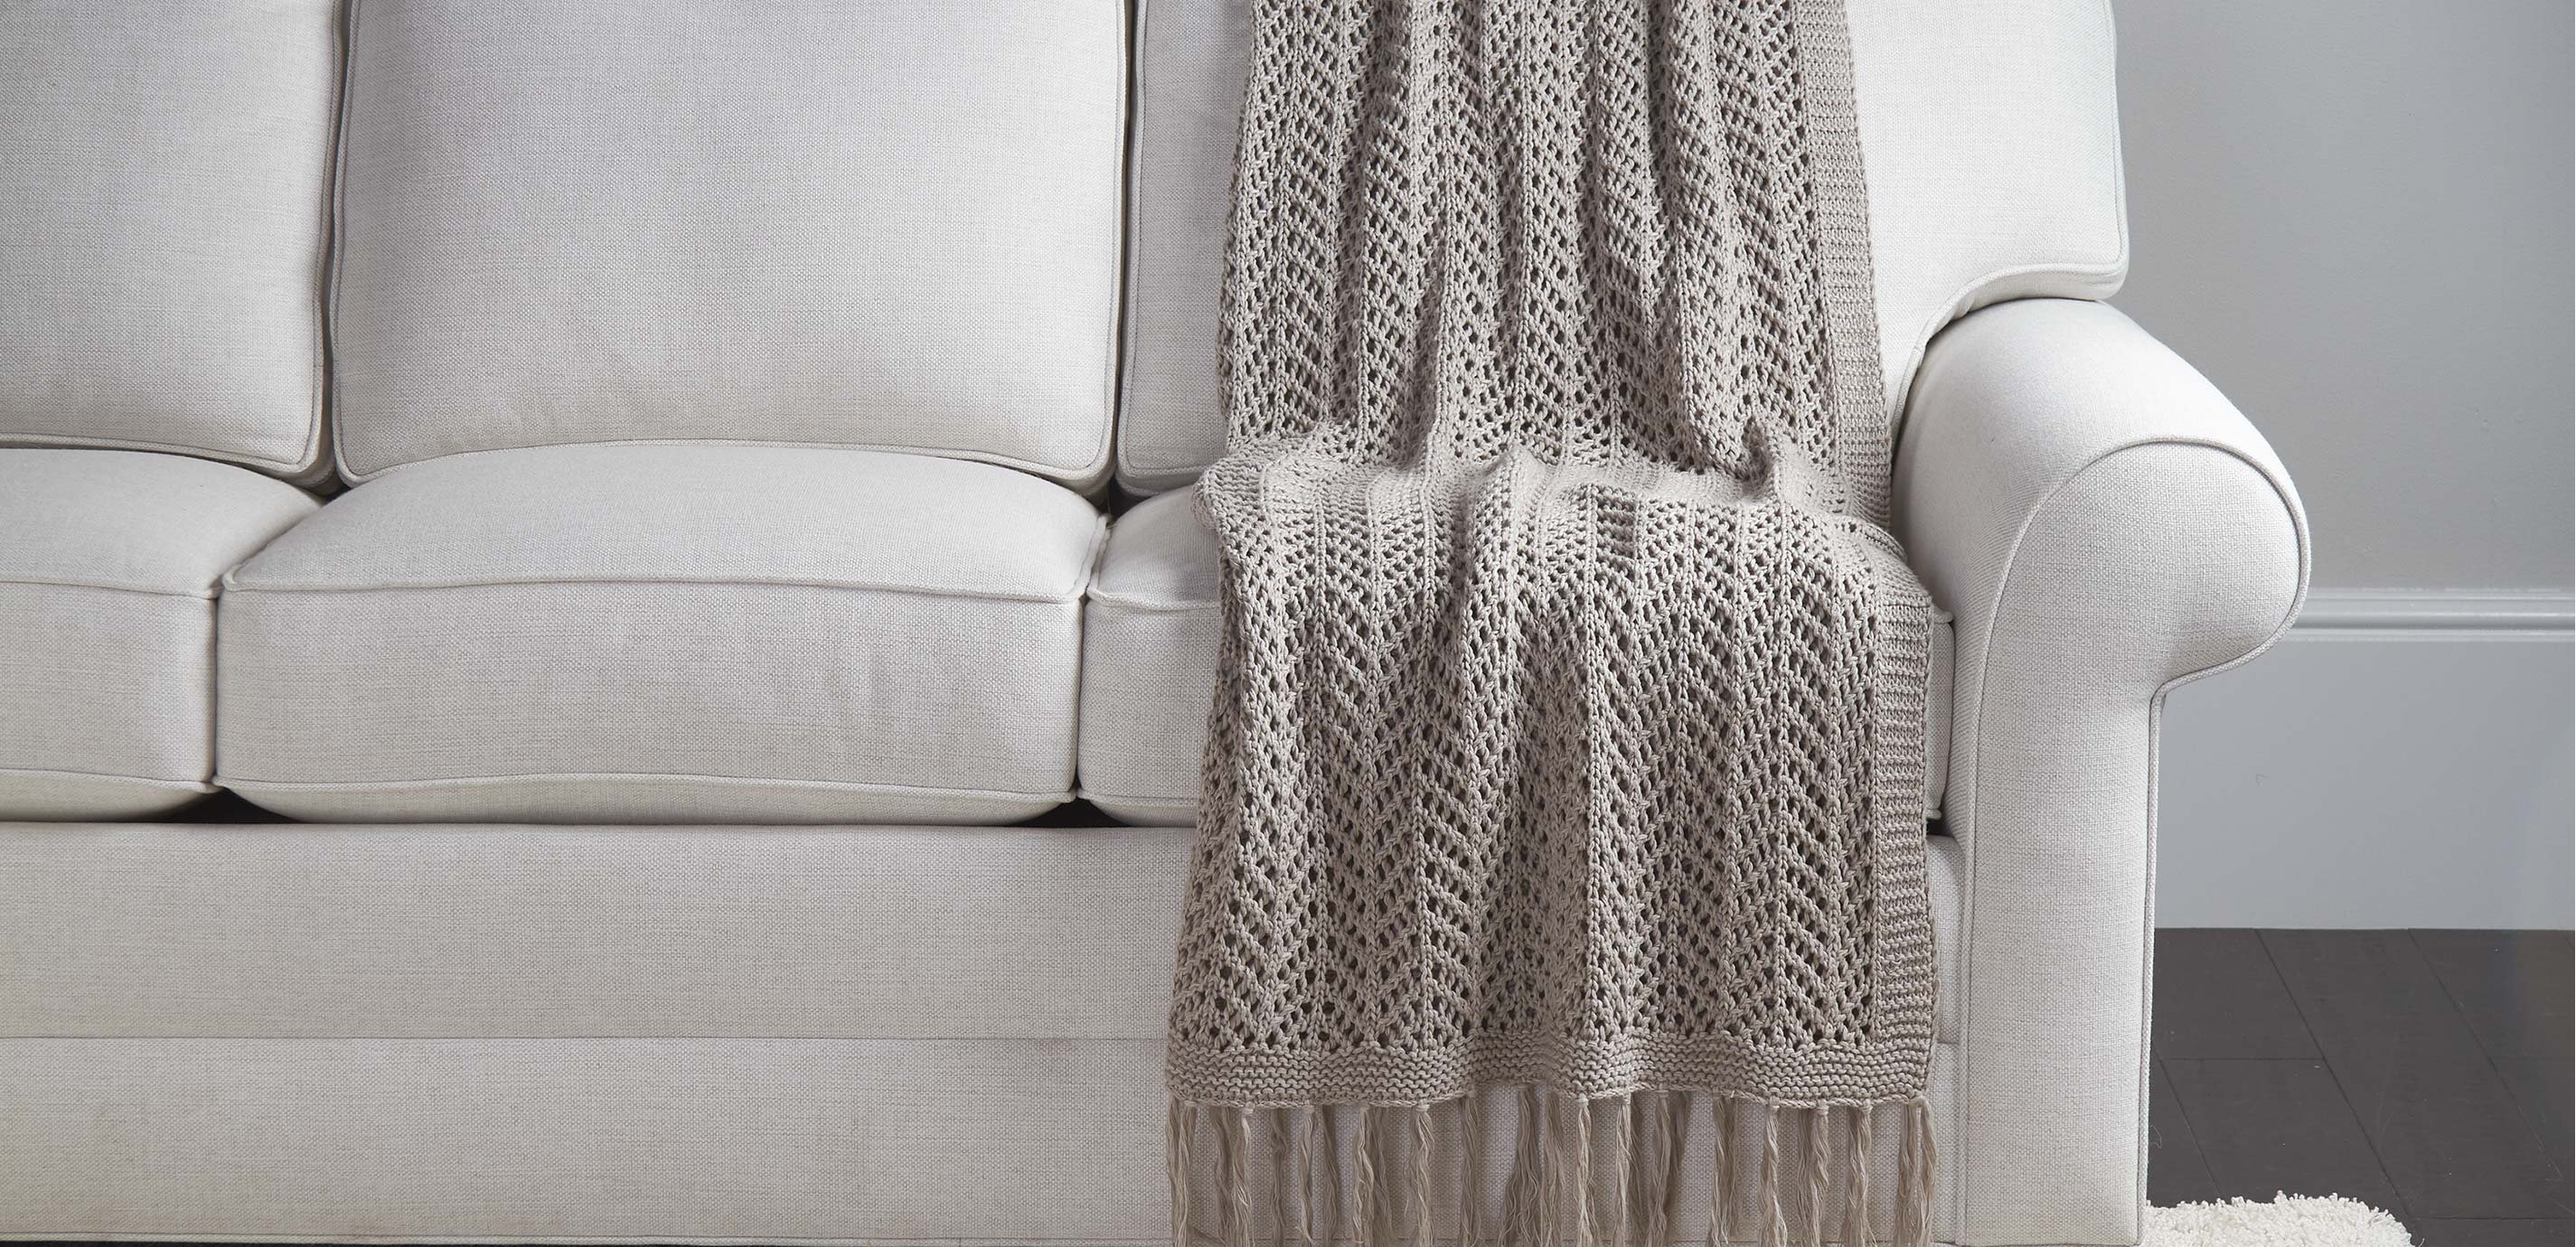 Pointelle Knit Blanket with Fringe, Delicate Throw